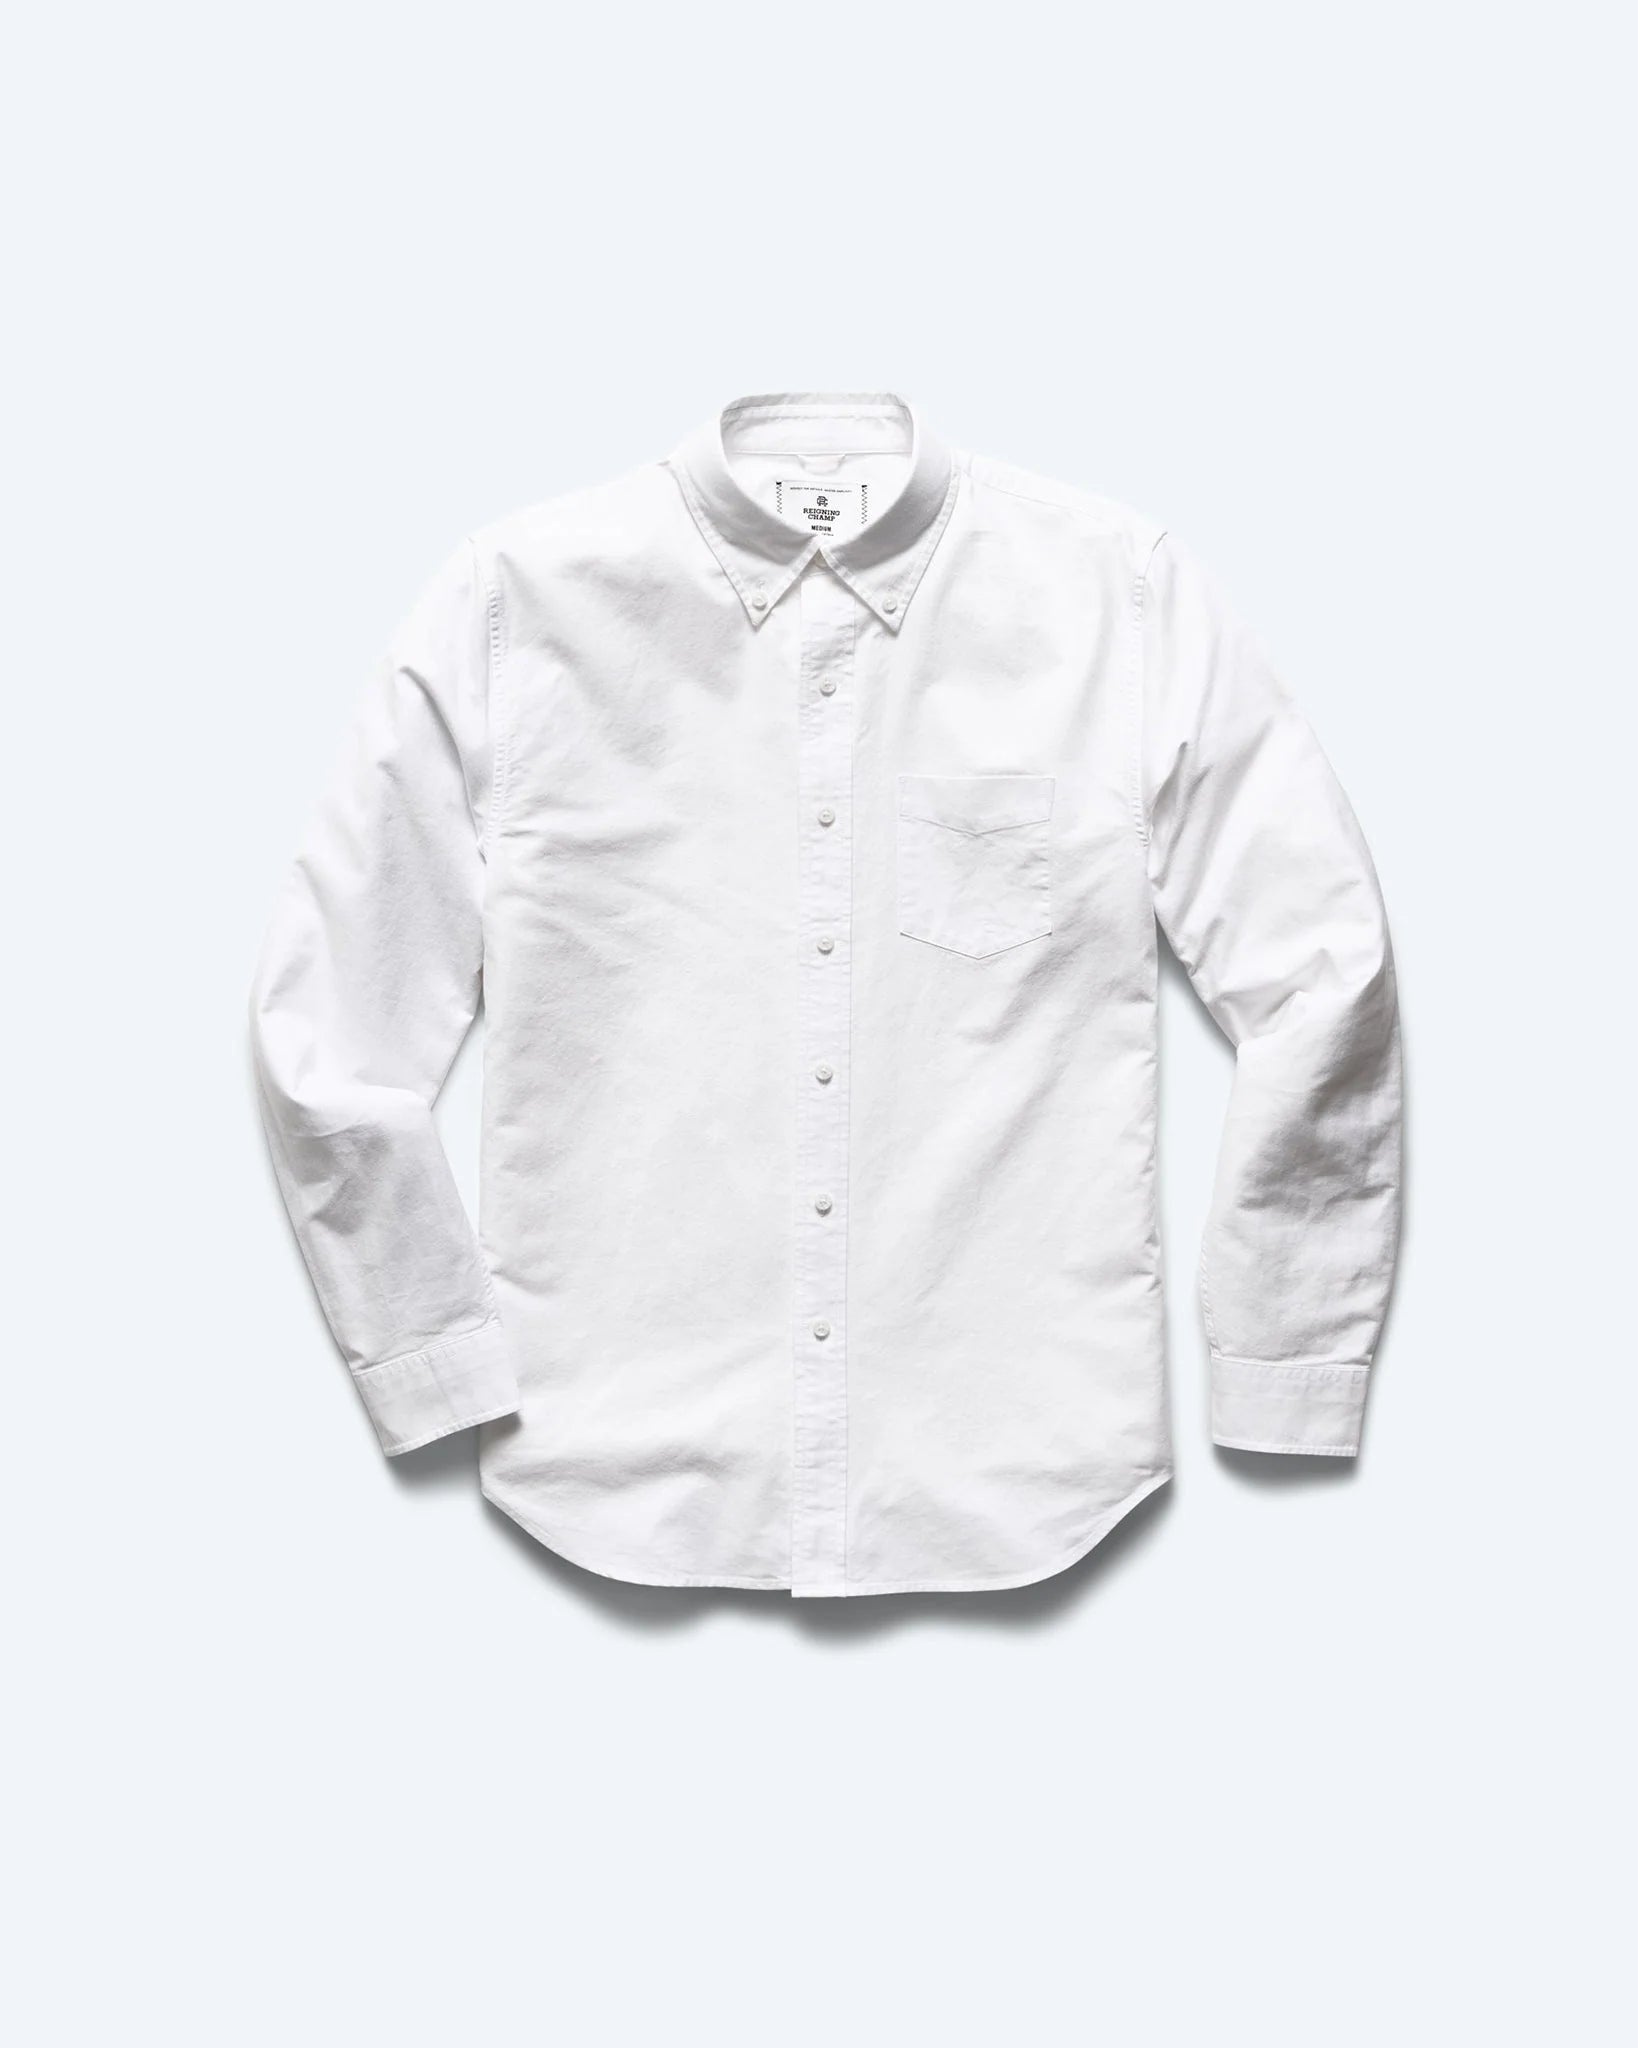 Reigning Champ Windsor Oxford Shirt in White